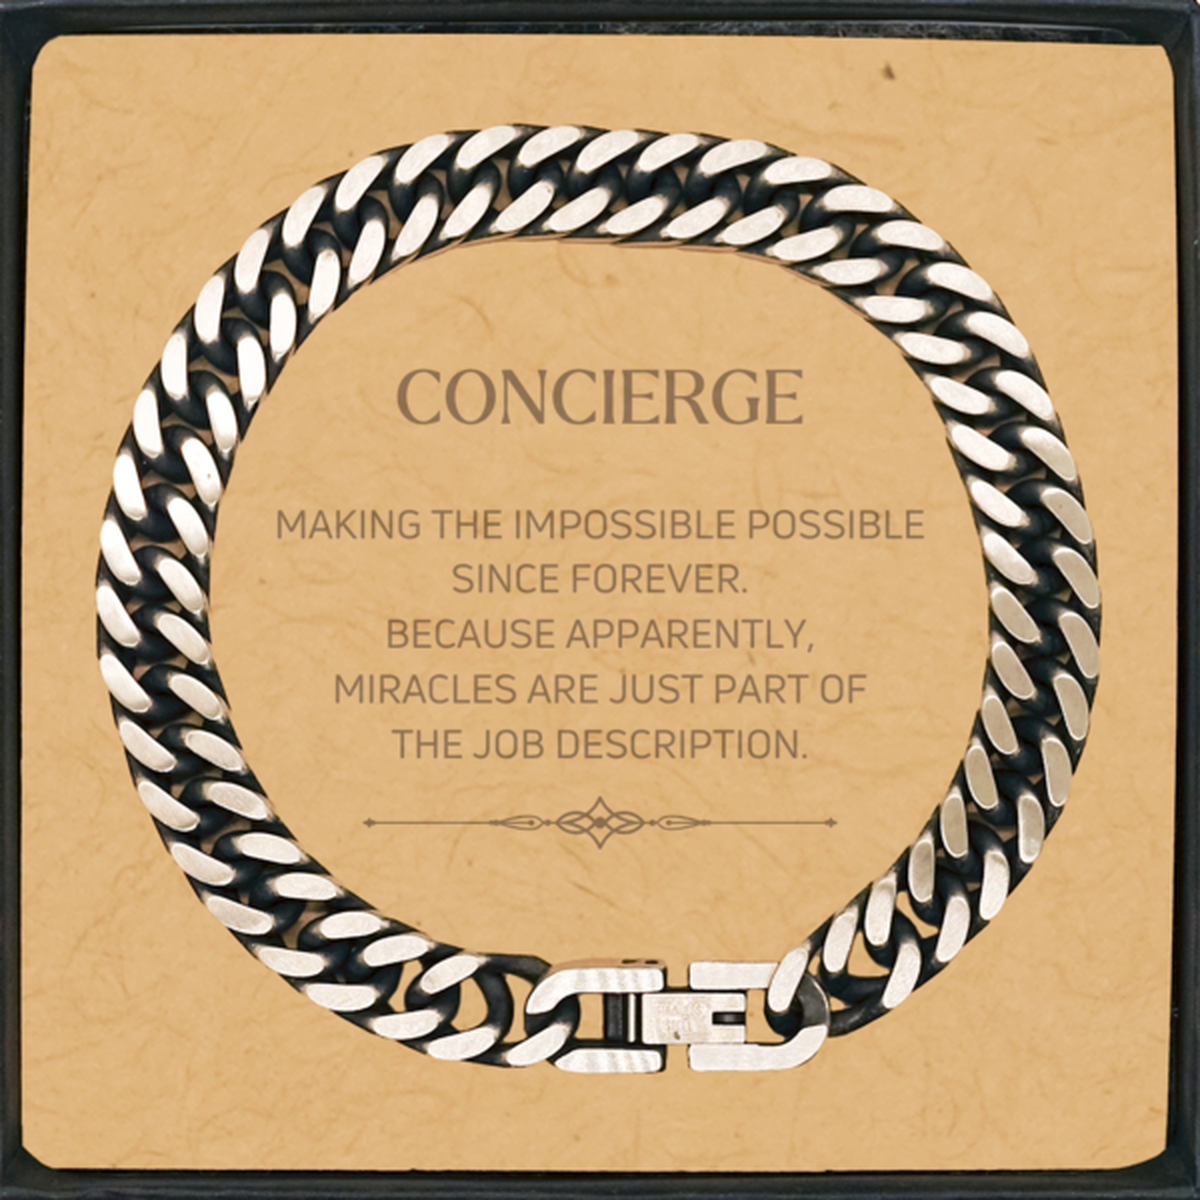 Funny Concierge Gifts, Miracles are just part of the job description, Inspirational Birthday Cuban Link Chain Bracelet For Concierge, Men, Women, Coworkers, Friends, Boss